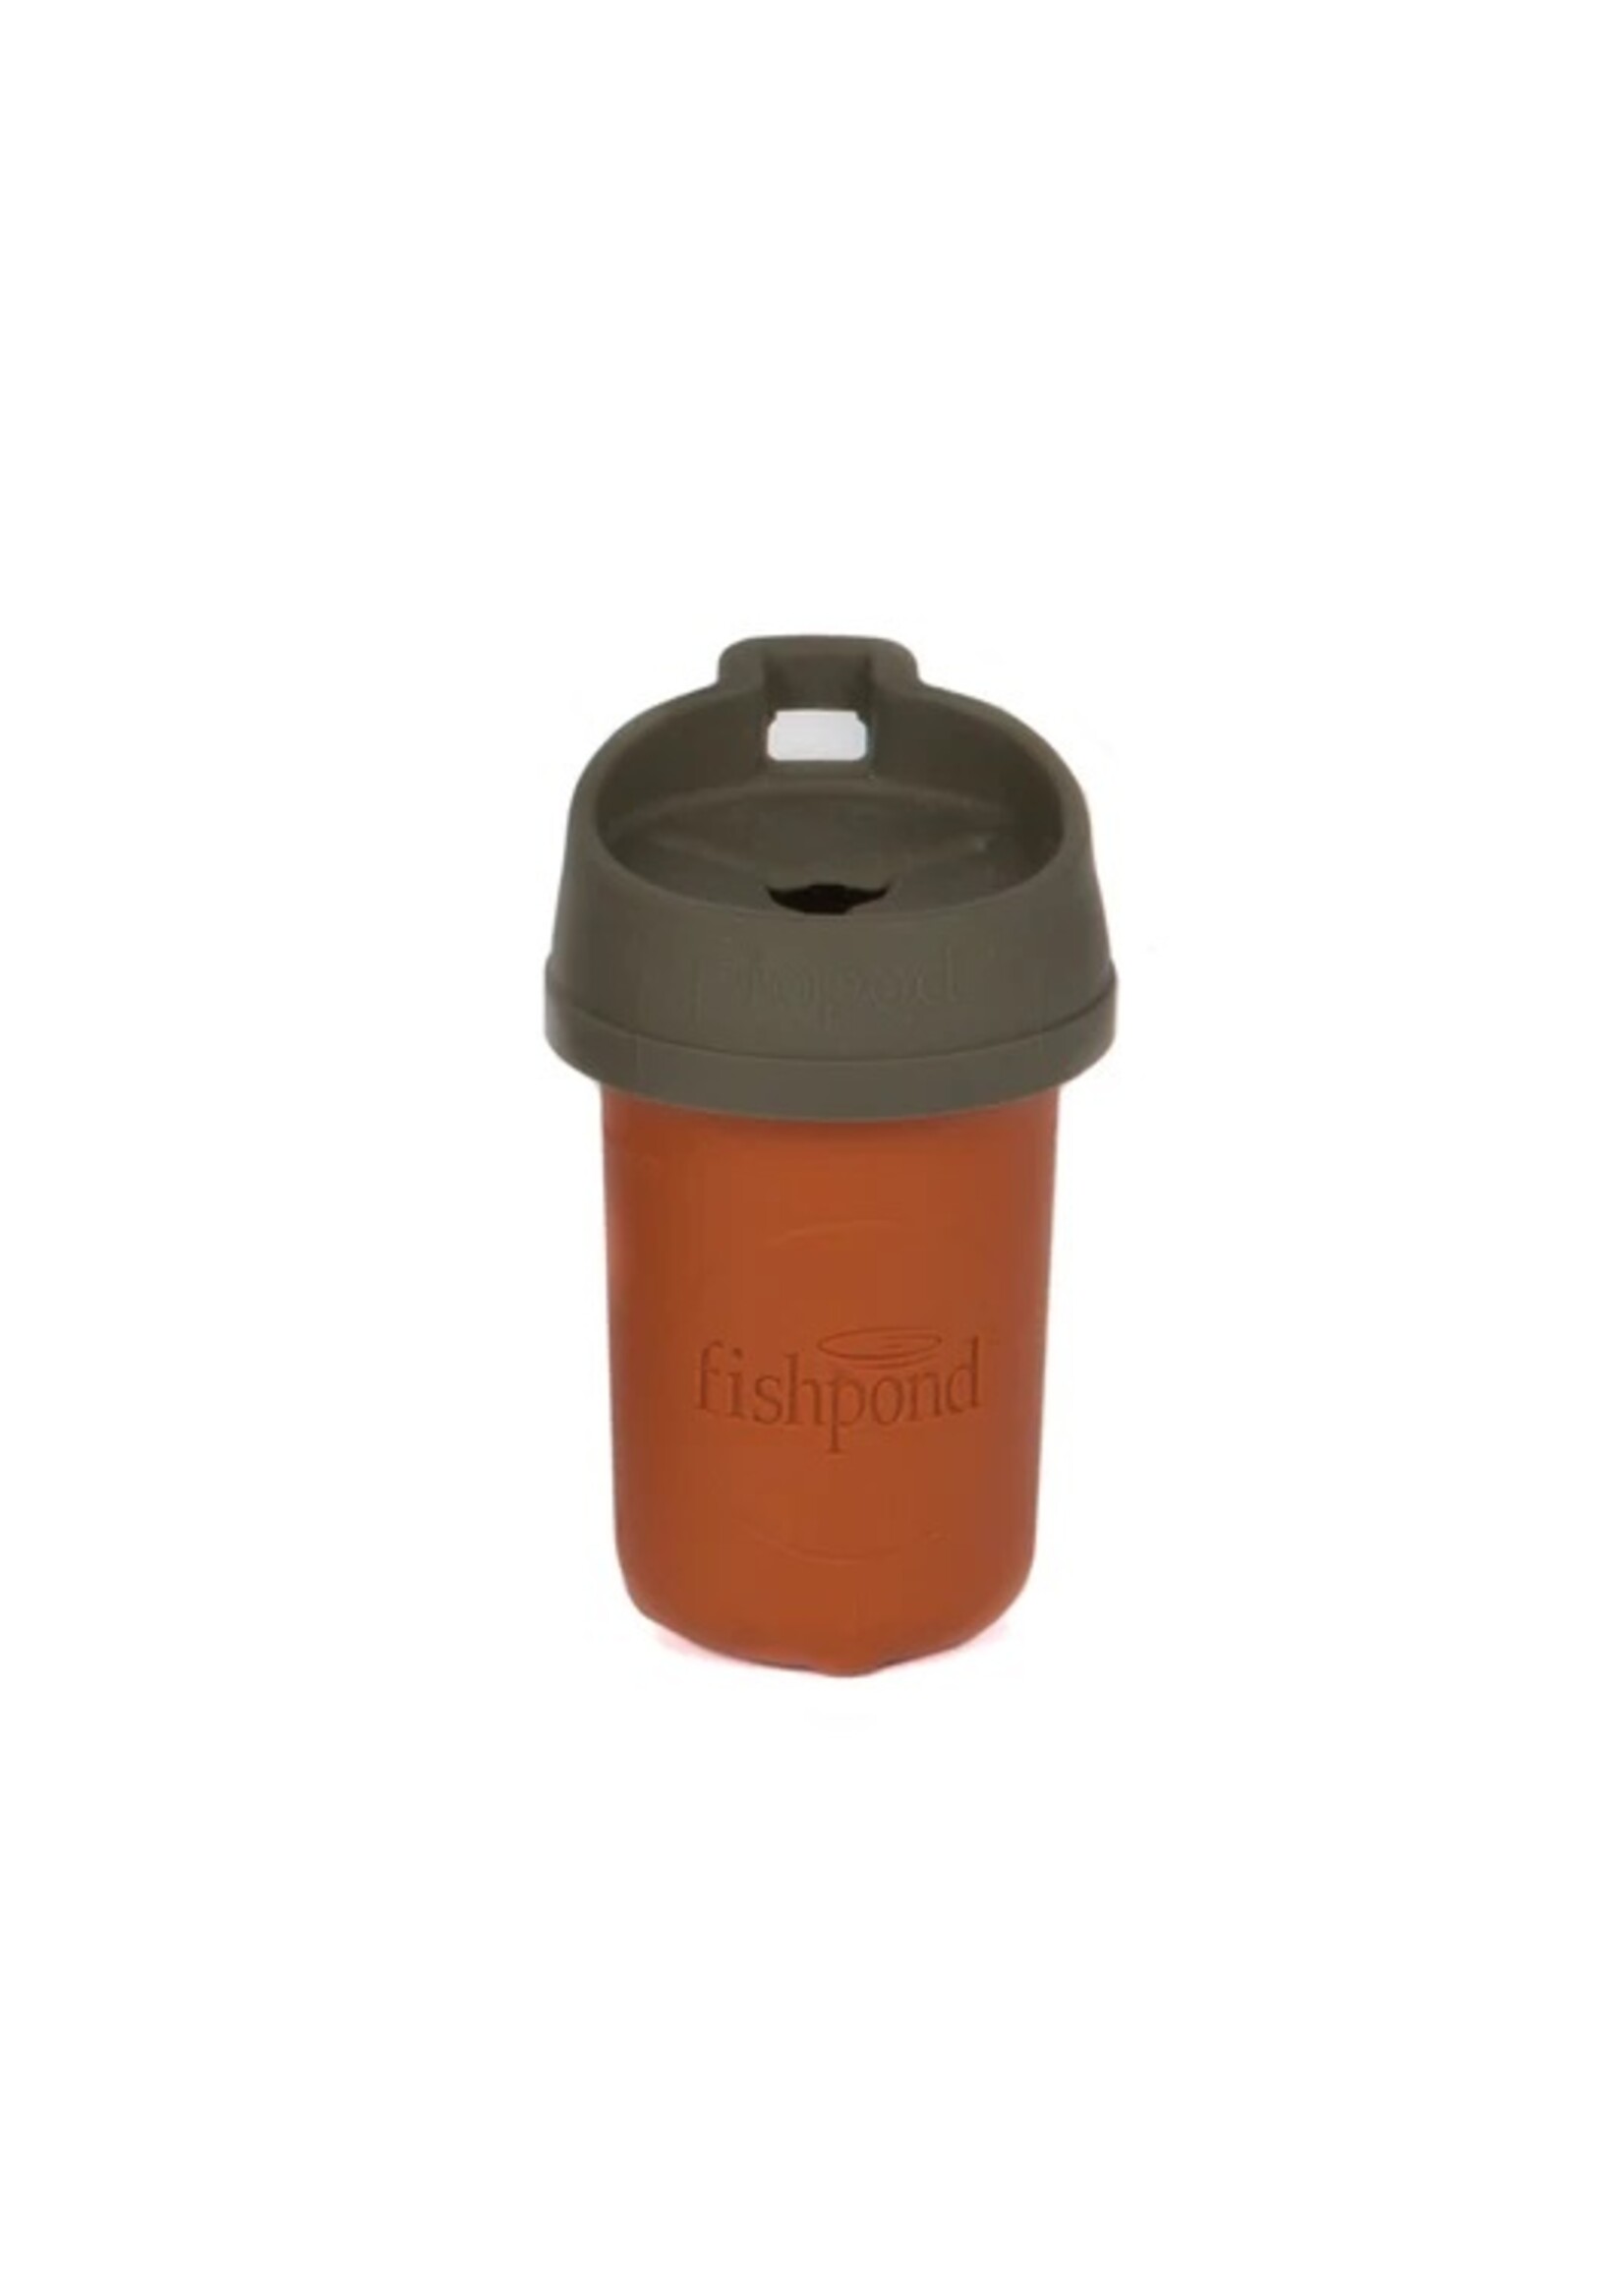 Fishpond Fishpond Piopod Microtrash Container